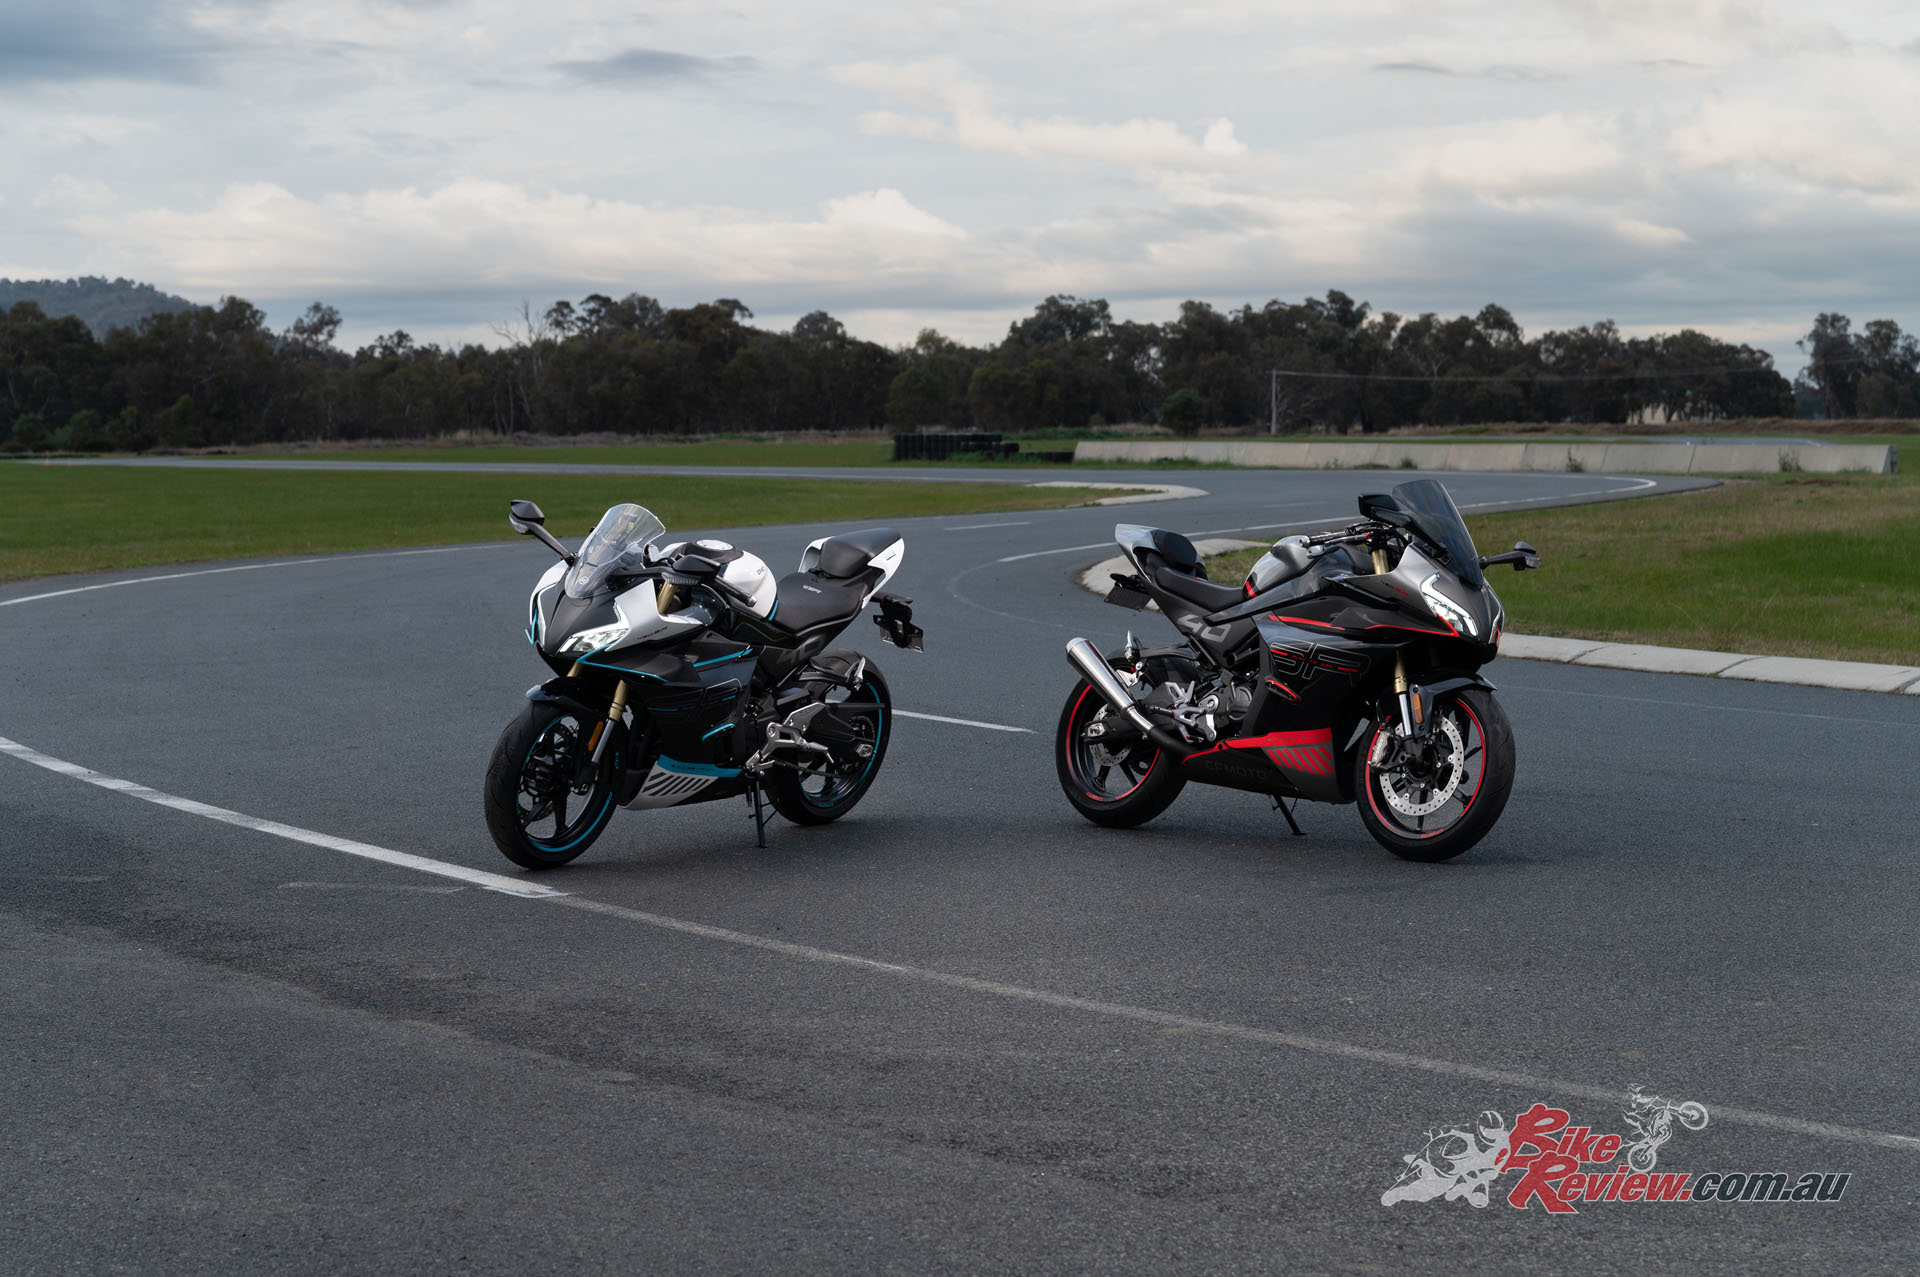 The 2023 CFMOTO is landing here with a choice of two colours, Nebula Black with Pearl White and Tosca Green accents or Zircon Black with Velocity Grey and Red accents.